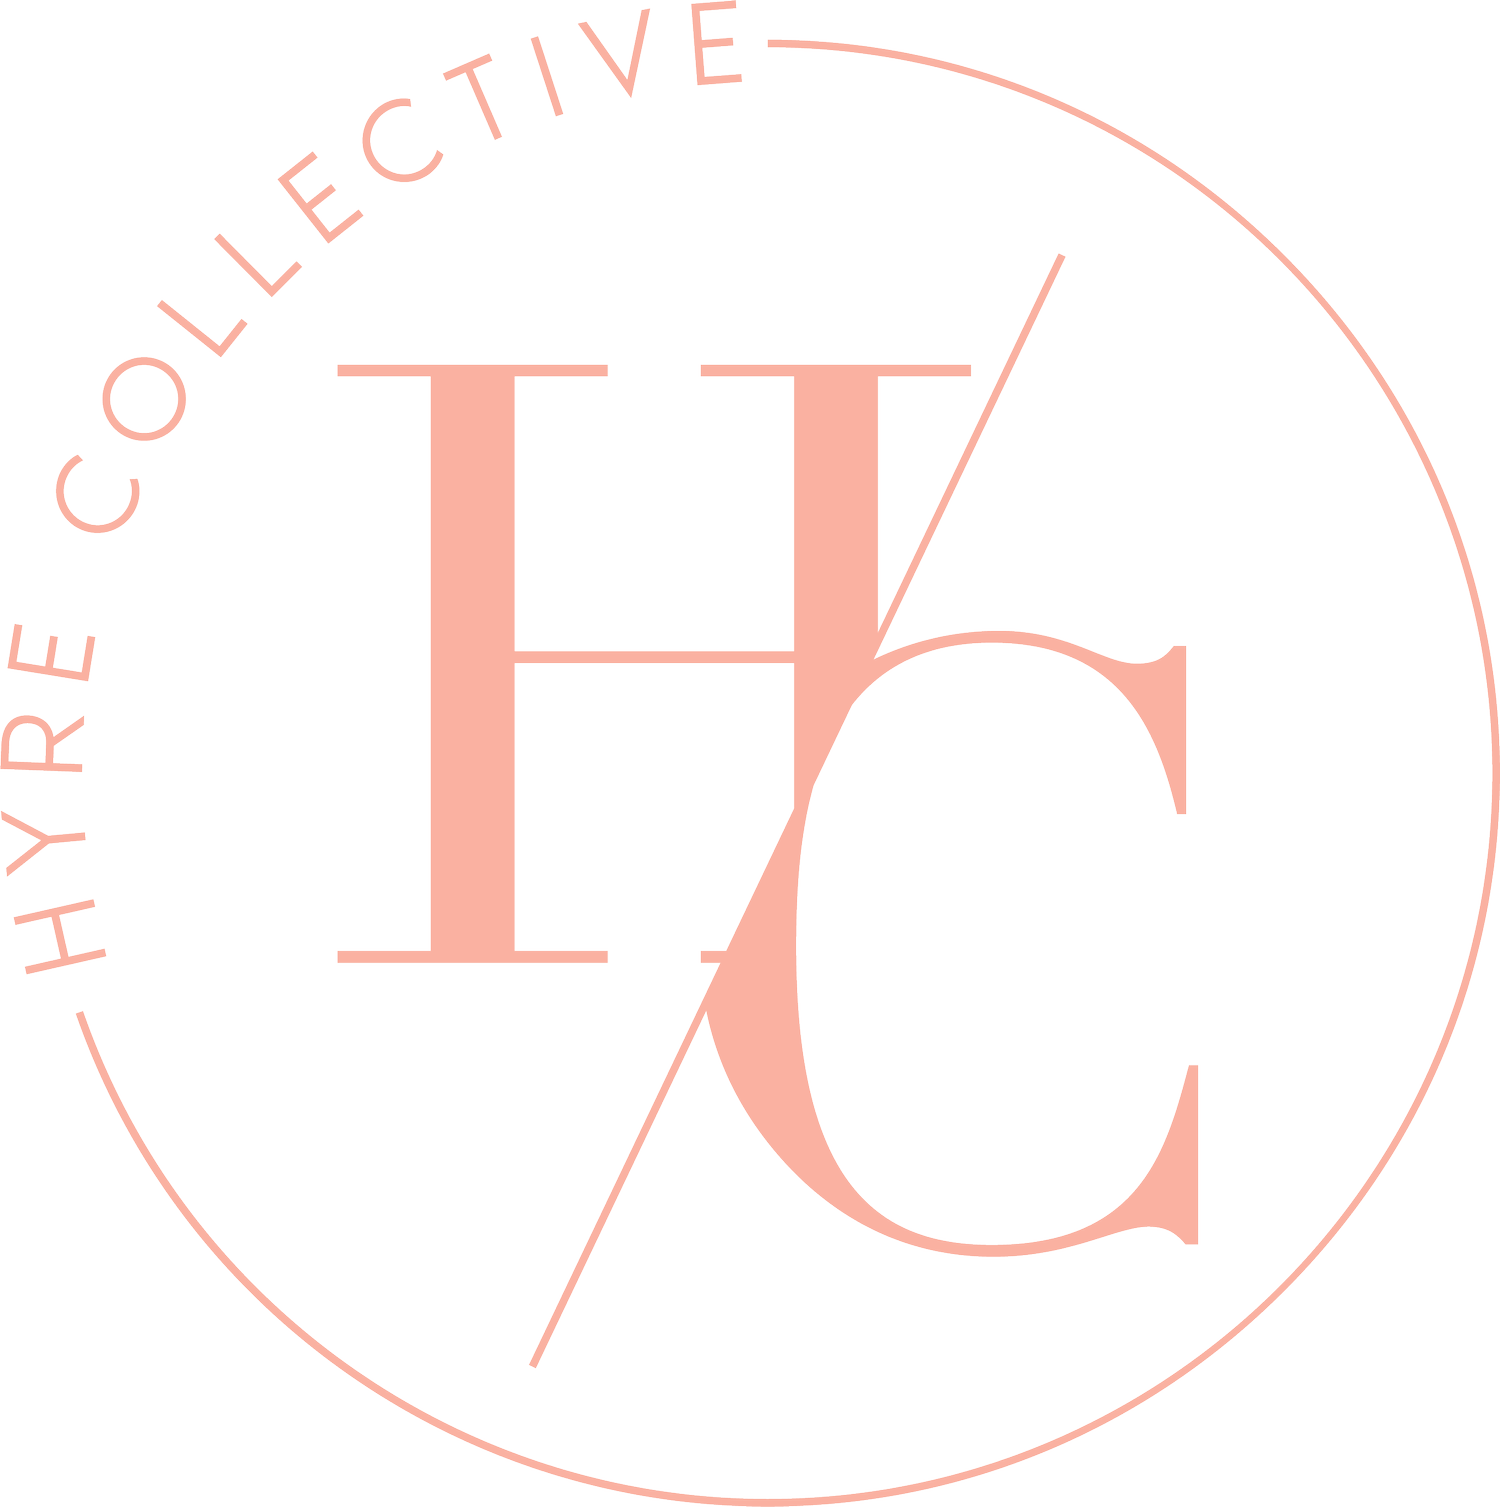 Hyre Collective